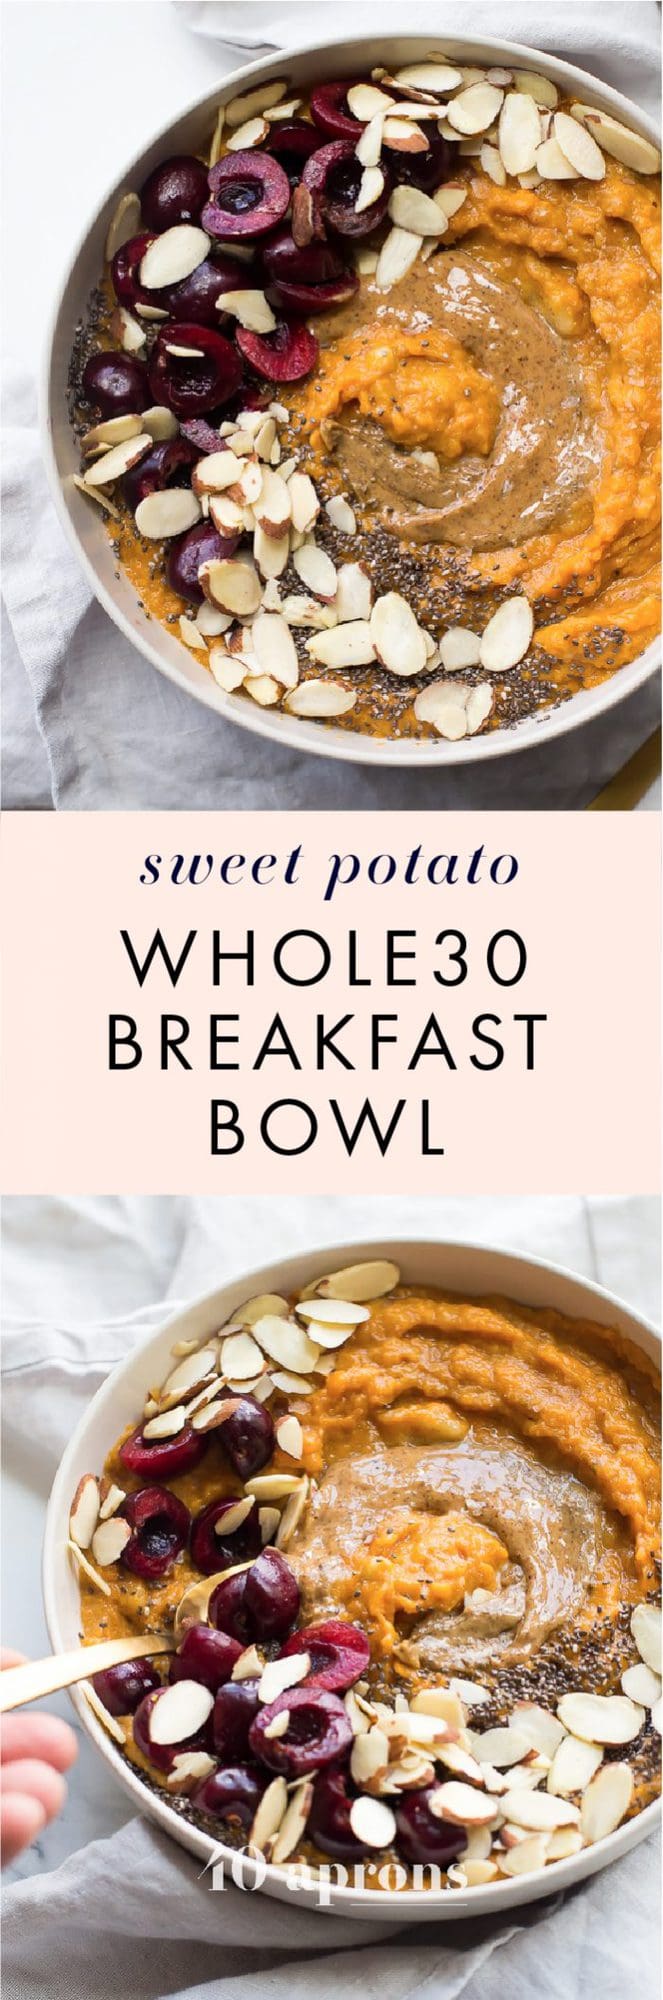 This sweet potato Whole30 breakfast bowl is the perfect Whole30 breakfast: quick and easy, a bit naturally sweet, packed with protein, fiber, and healthy fats. It's strangely delicious, considering how simple of a recipe it is! This sweet potato Whole30 breakfast bowl uses a banana and a couple eggs to generate some serious sticking power, and you'll love how quickly this Whole30 breakfast bowl comes together. Super versatile, too!